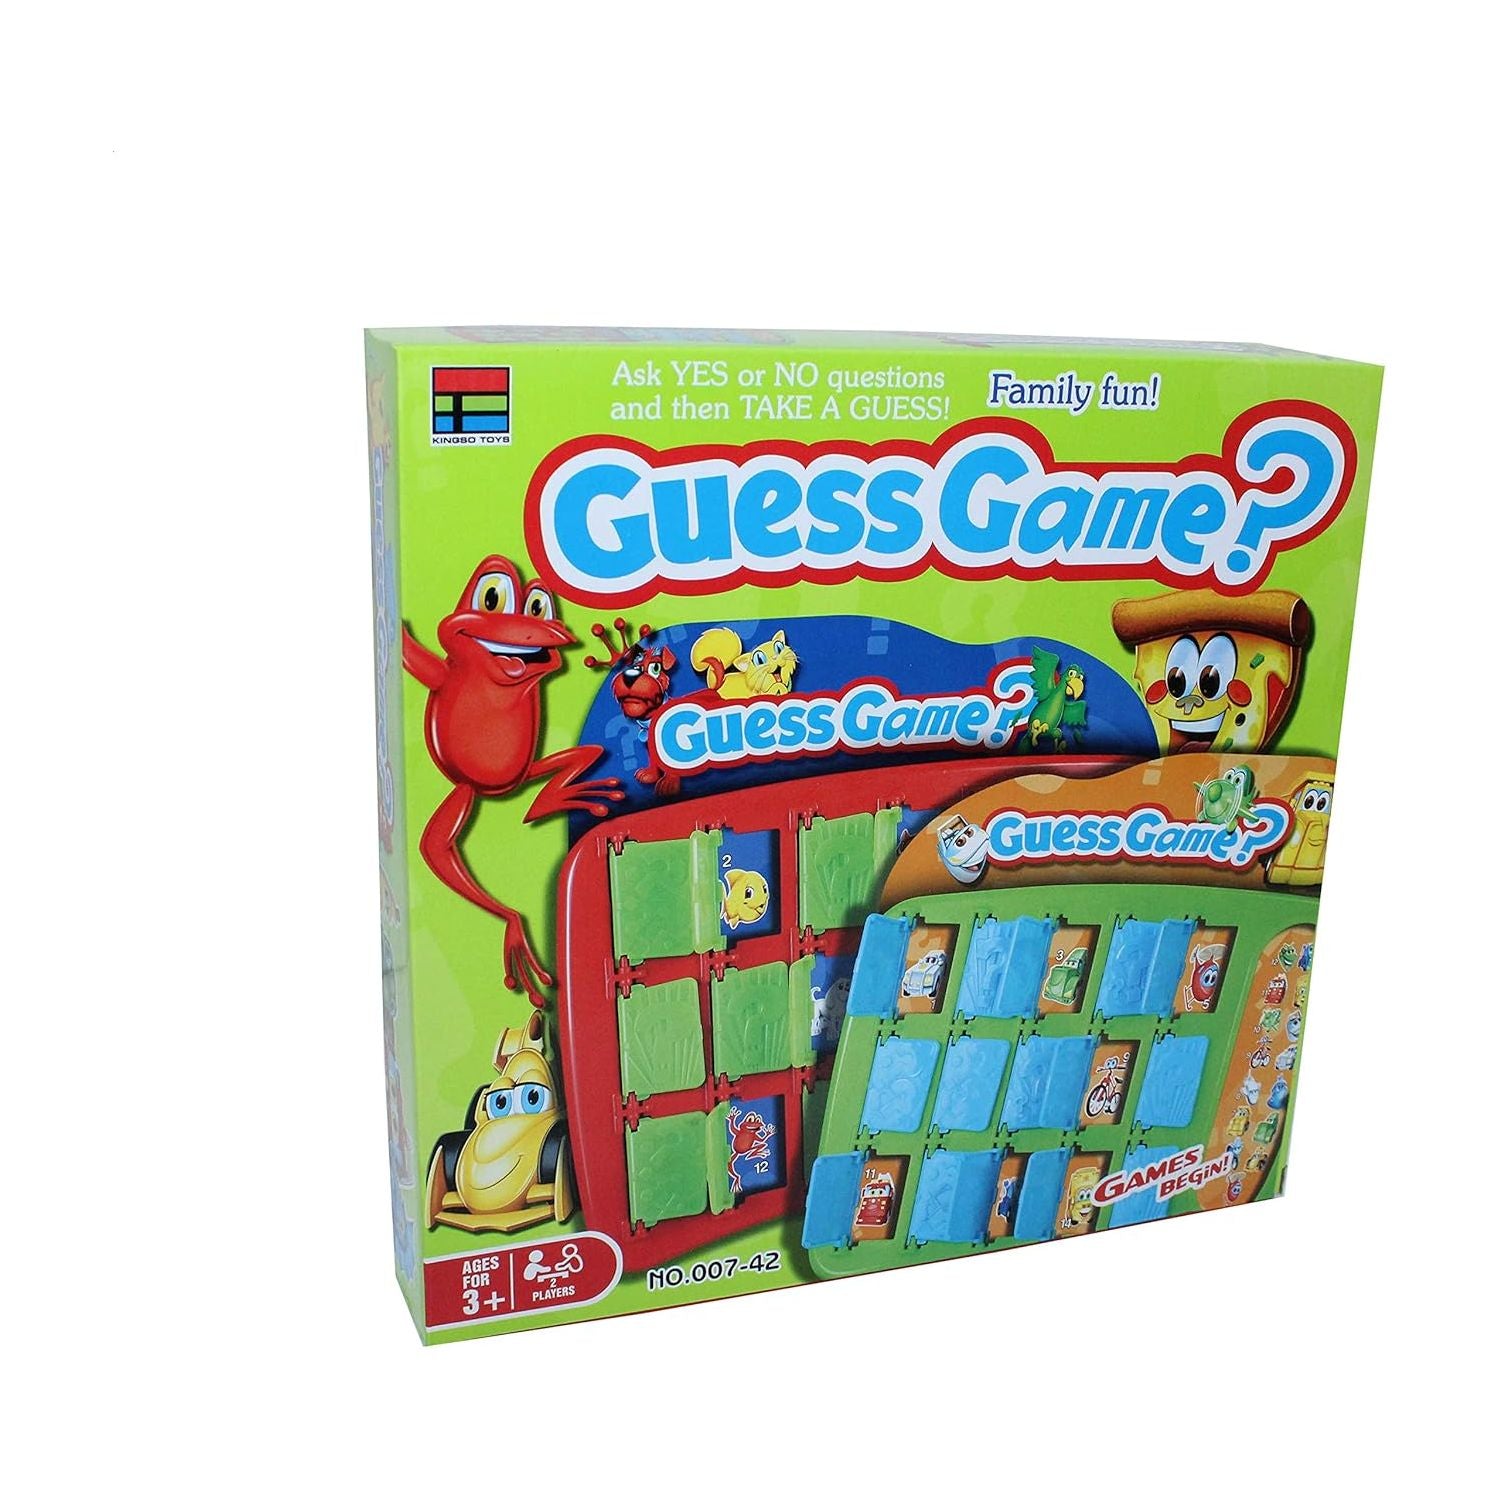 Board Game 007-42 Guess Game? Animals the playing field